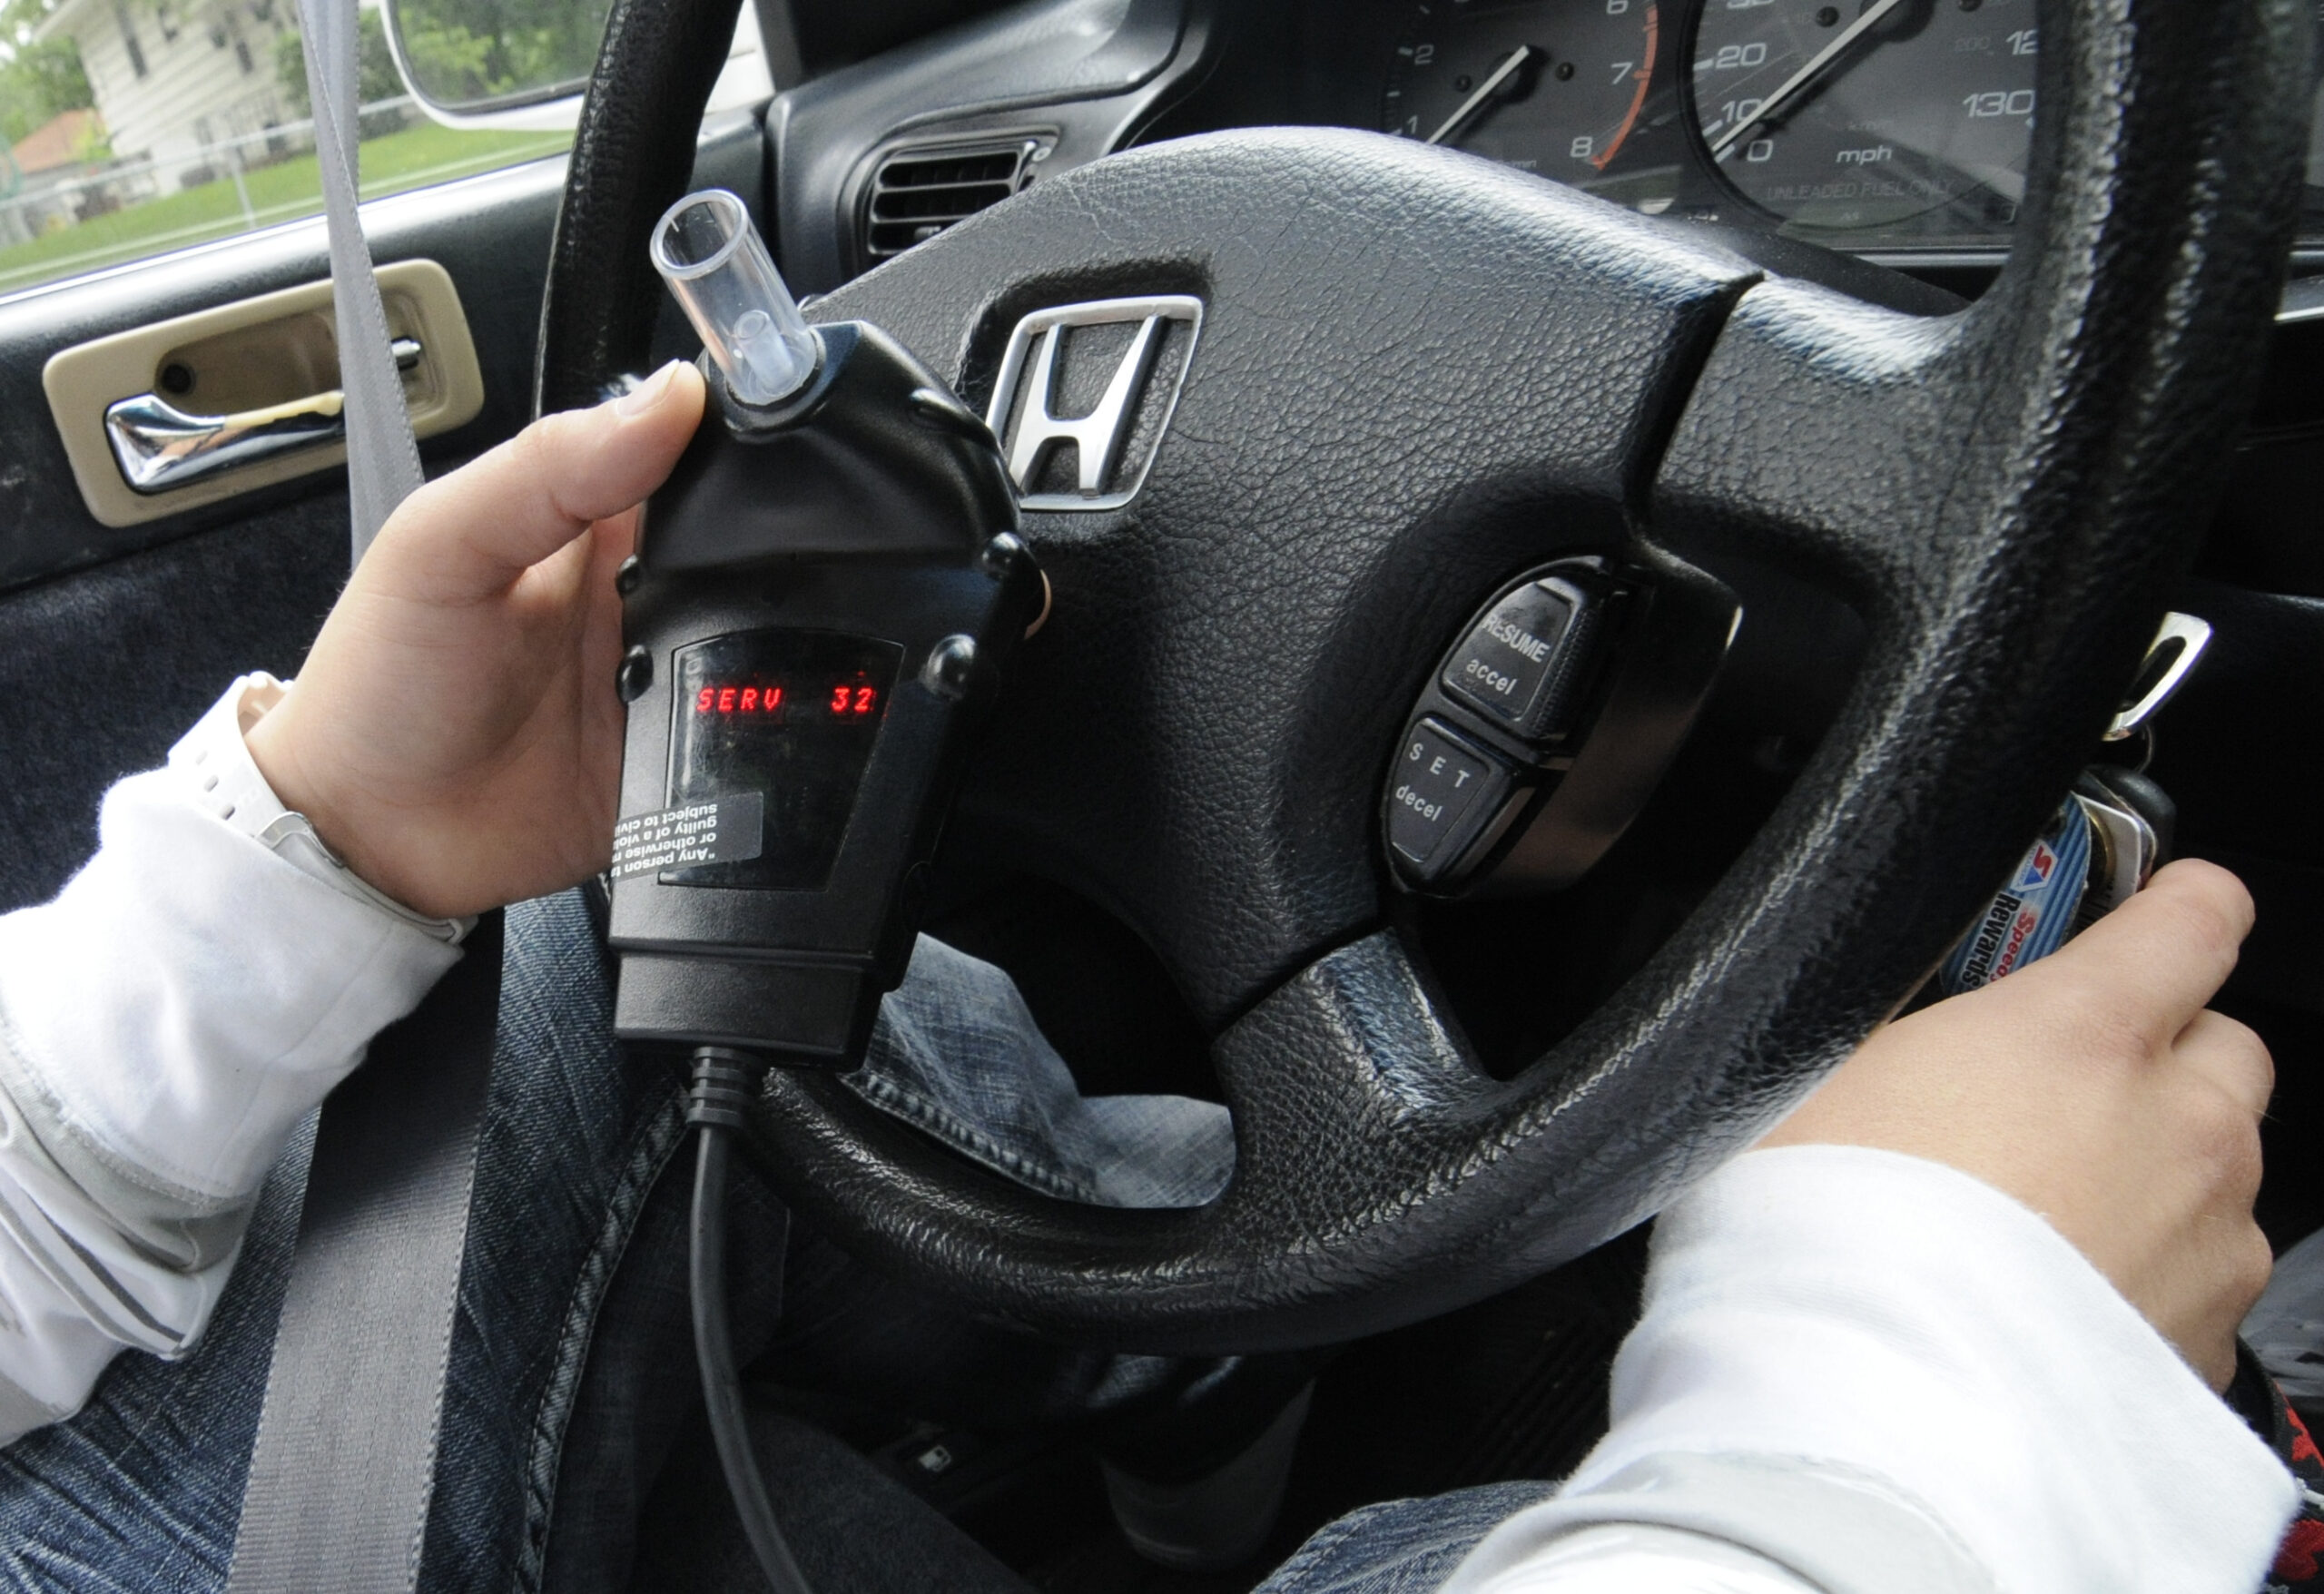 Study Shows Ignition Interlocks Prevented Thousands Of Drunk Driving Attempts